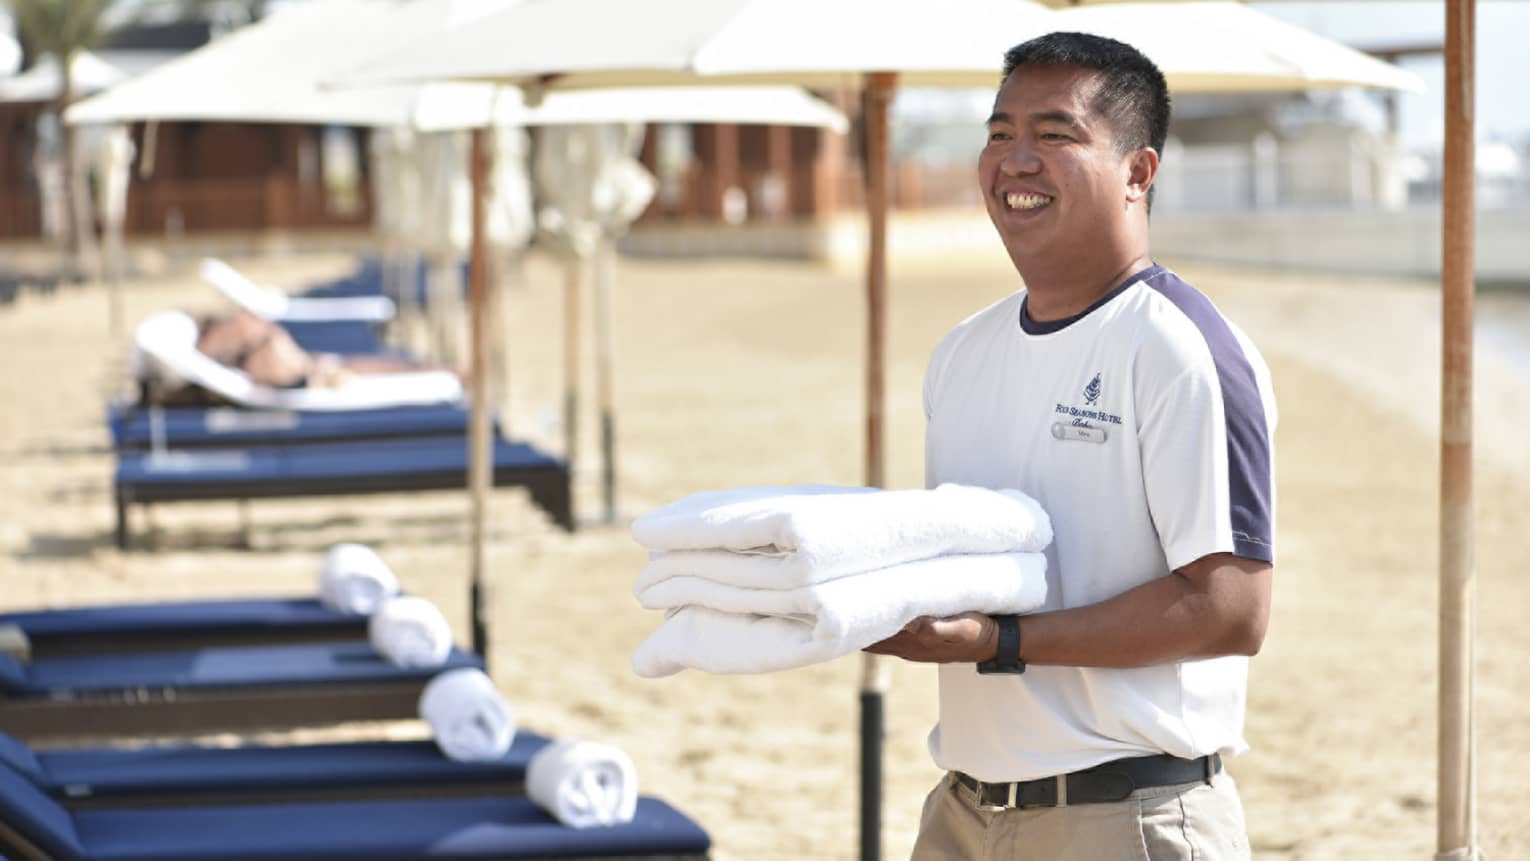 Beach attendant wearing white t-shirt and khaki pants smiles as he carries two fresh towels past navy-blue lounge chairs on the beach